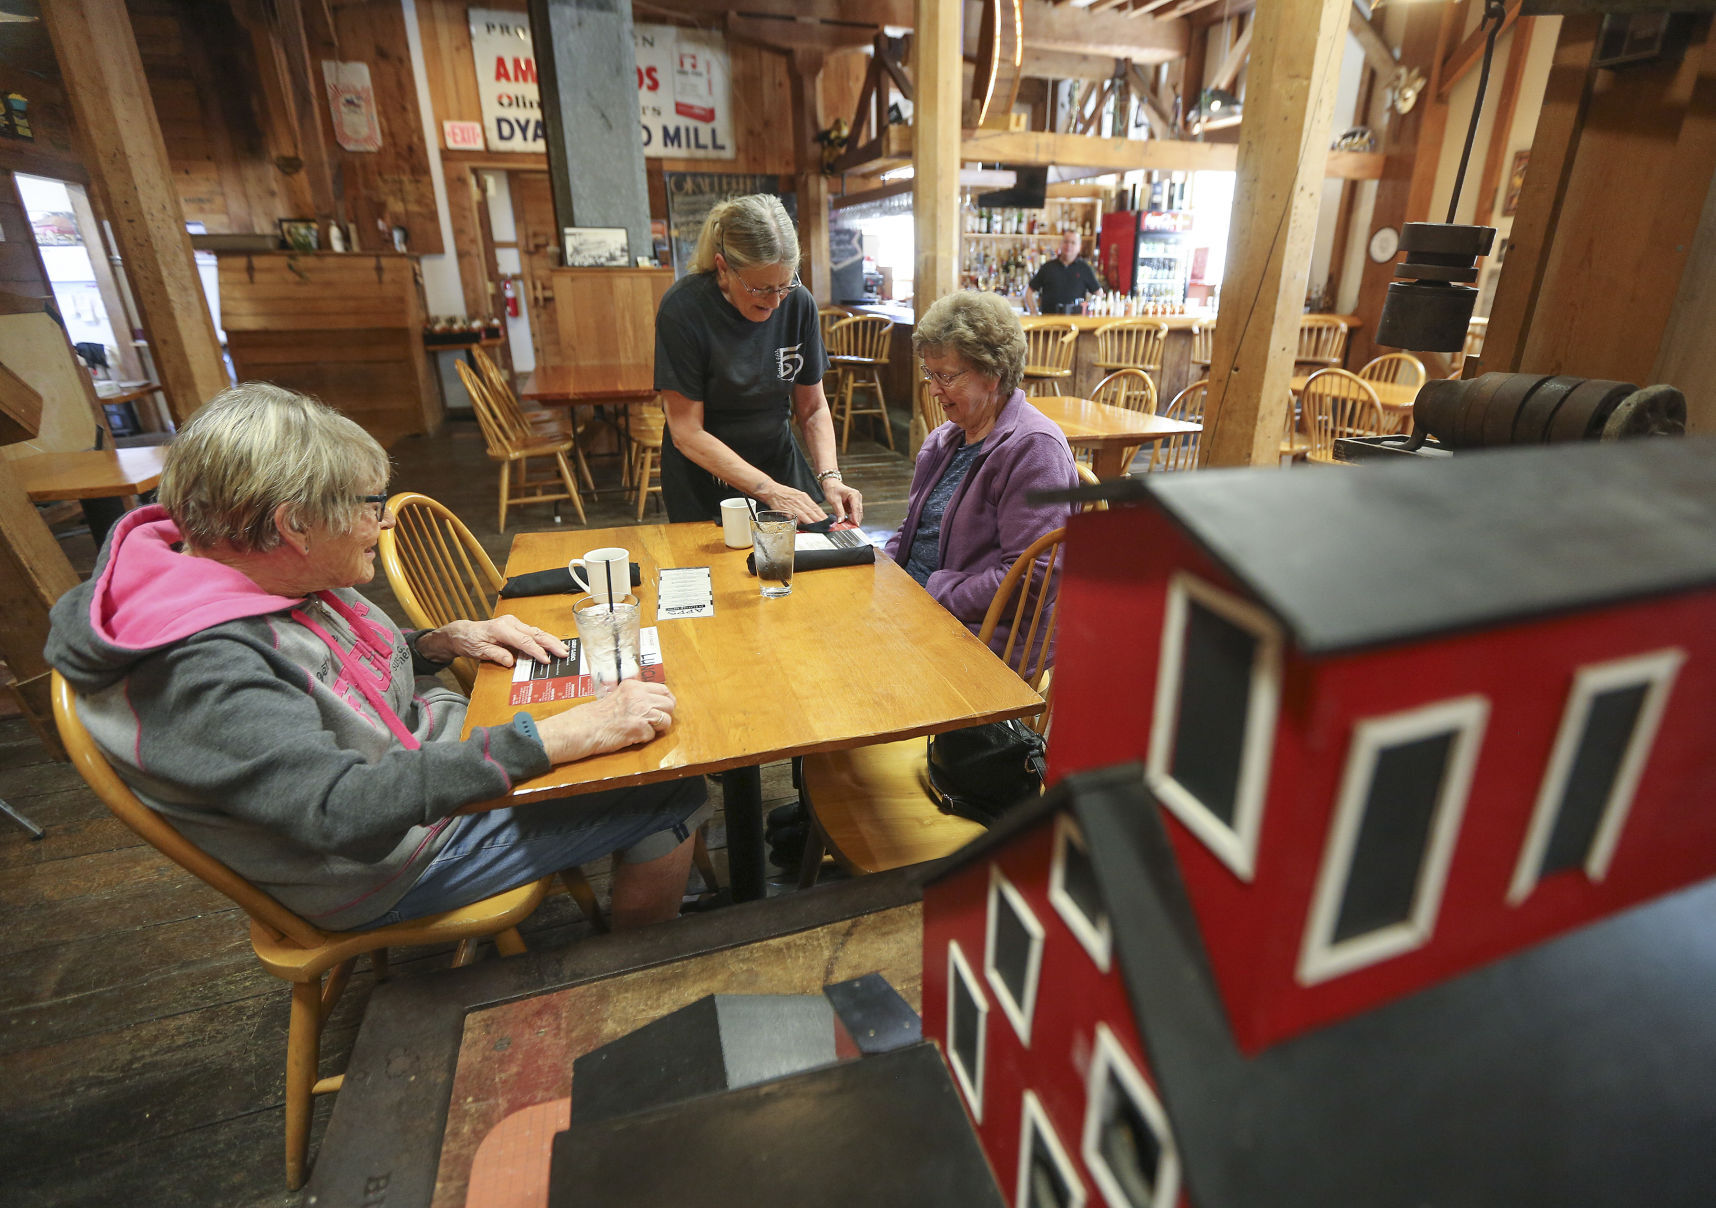 Lou Ann Meier, a waitress at Flatted Fifth Blues & BBQ in Bellevue, Iowa, serves customers Janet Koehler (left) and Joyce Till, both of Andrew, Iowa, at the restaurant on Thursday. PHOTO CREDIT: Dave Kettering